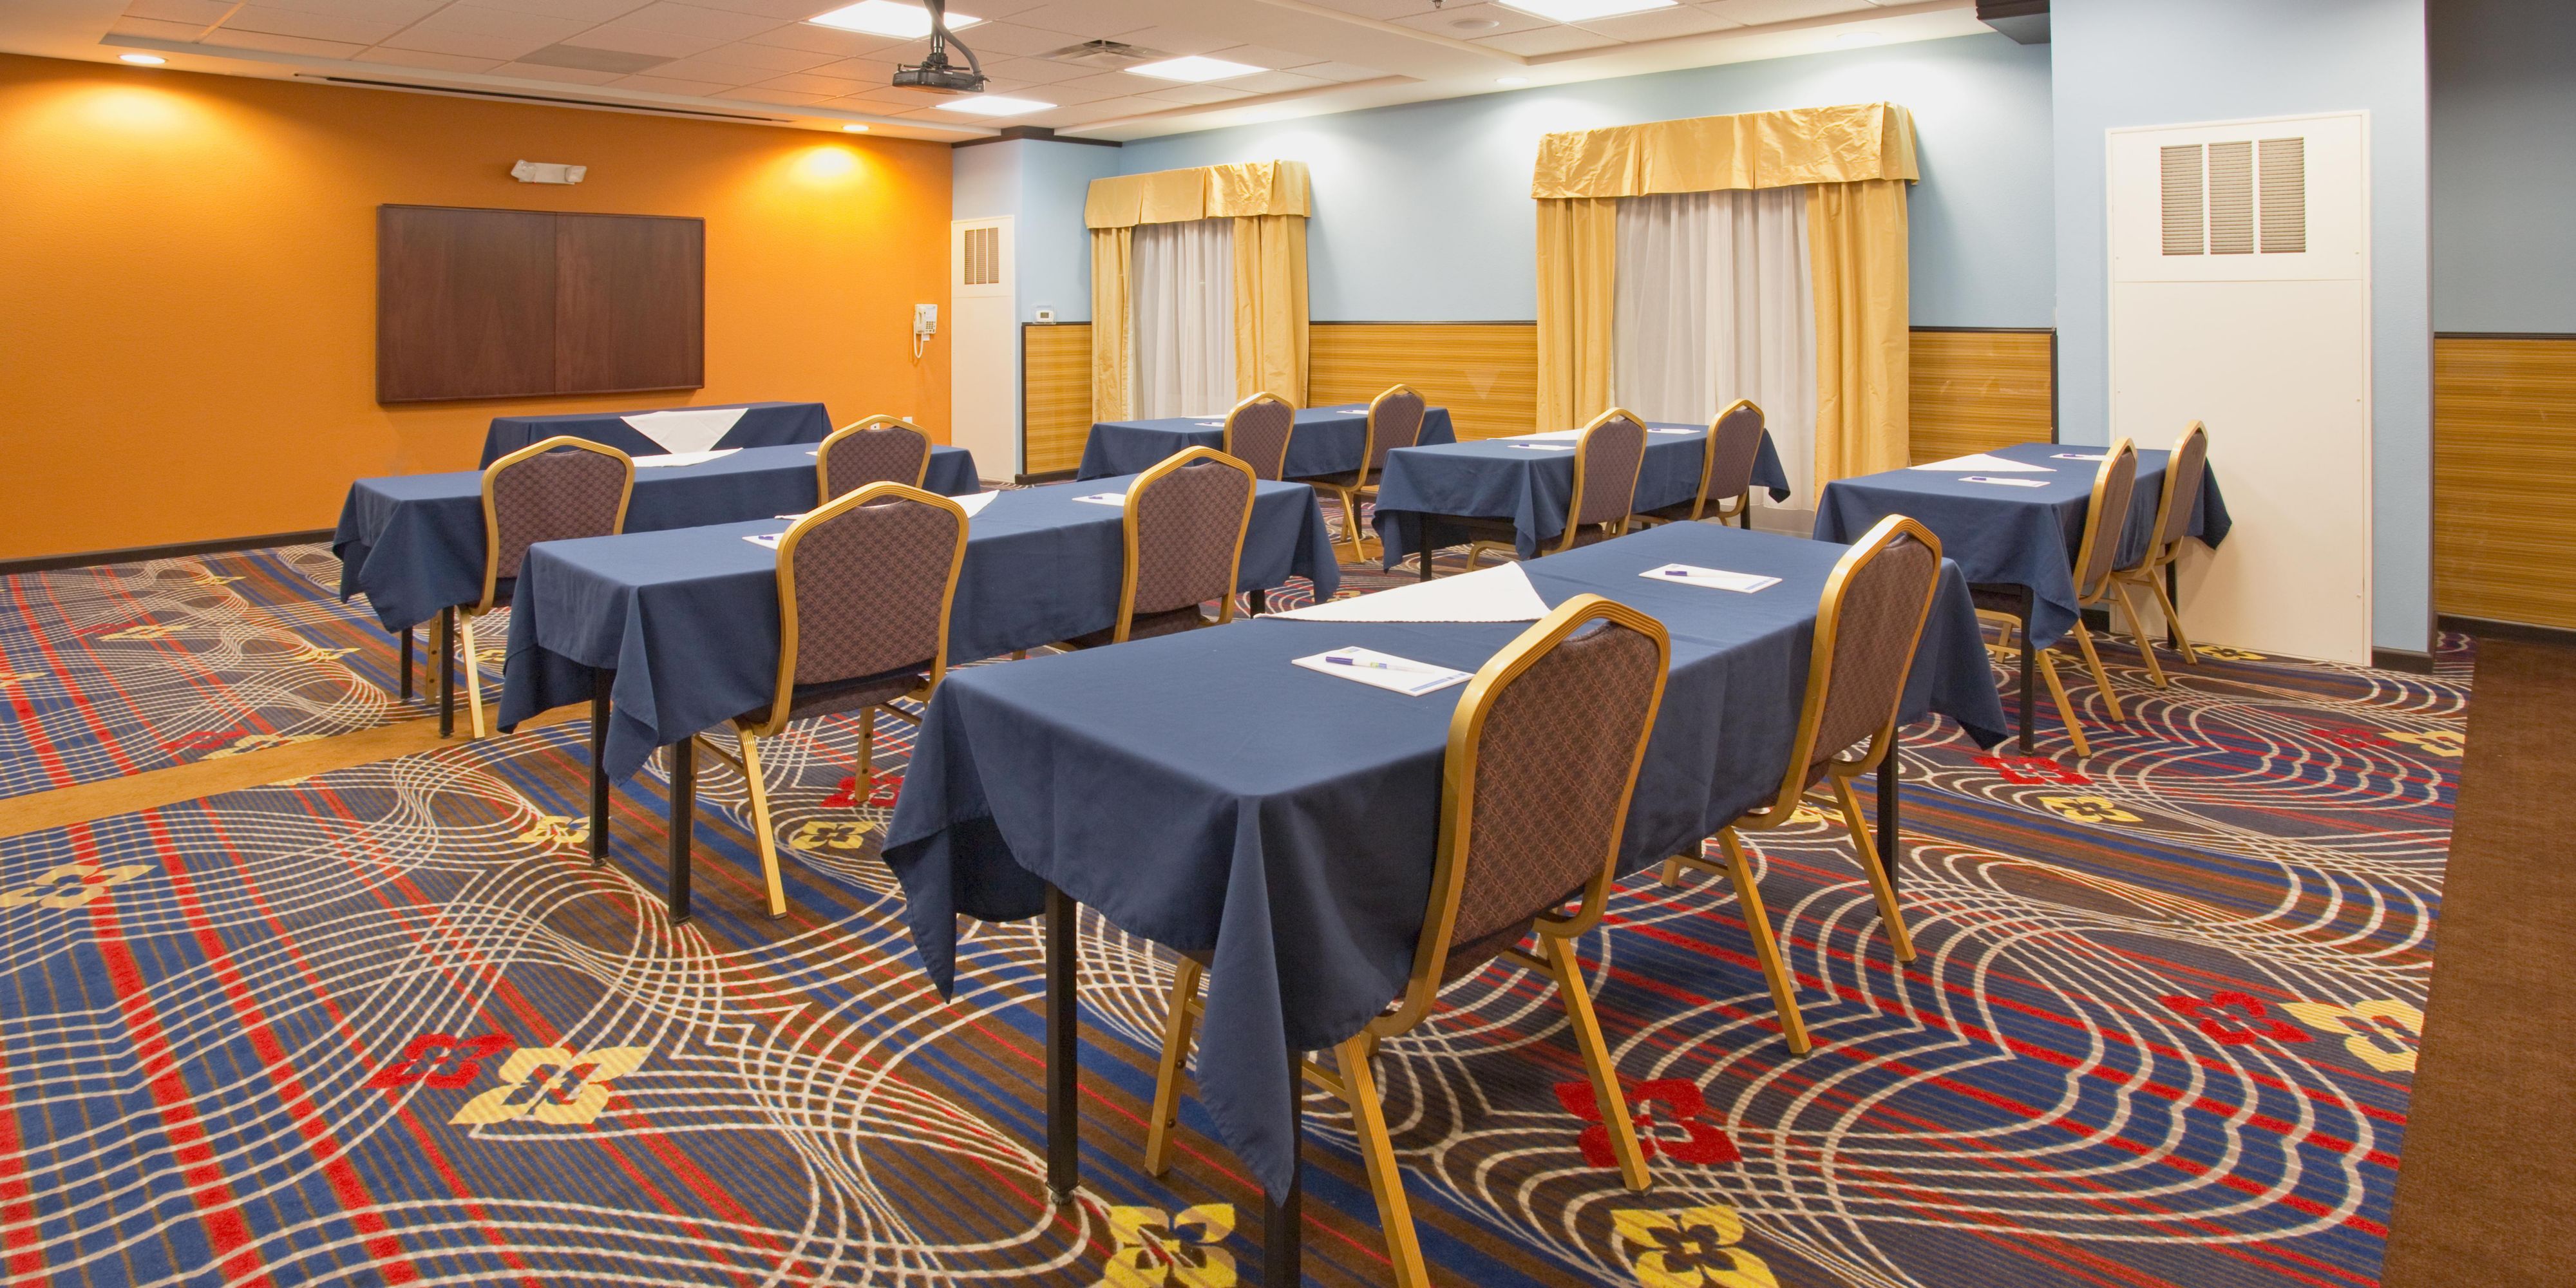 Need to hold a quick meeting? We have the space for you! Contact our Sales Team to discuss your needs. 